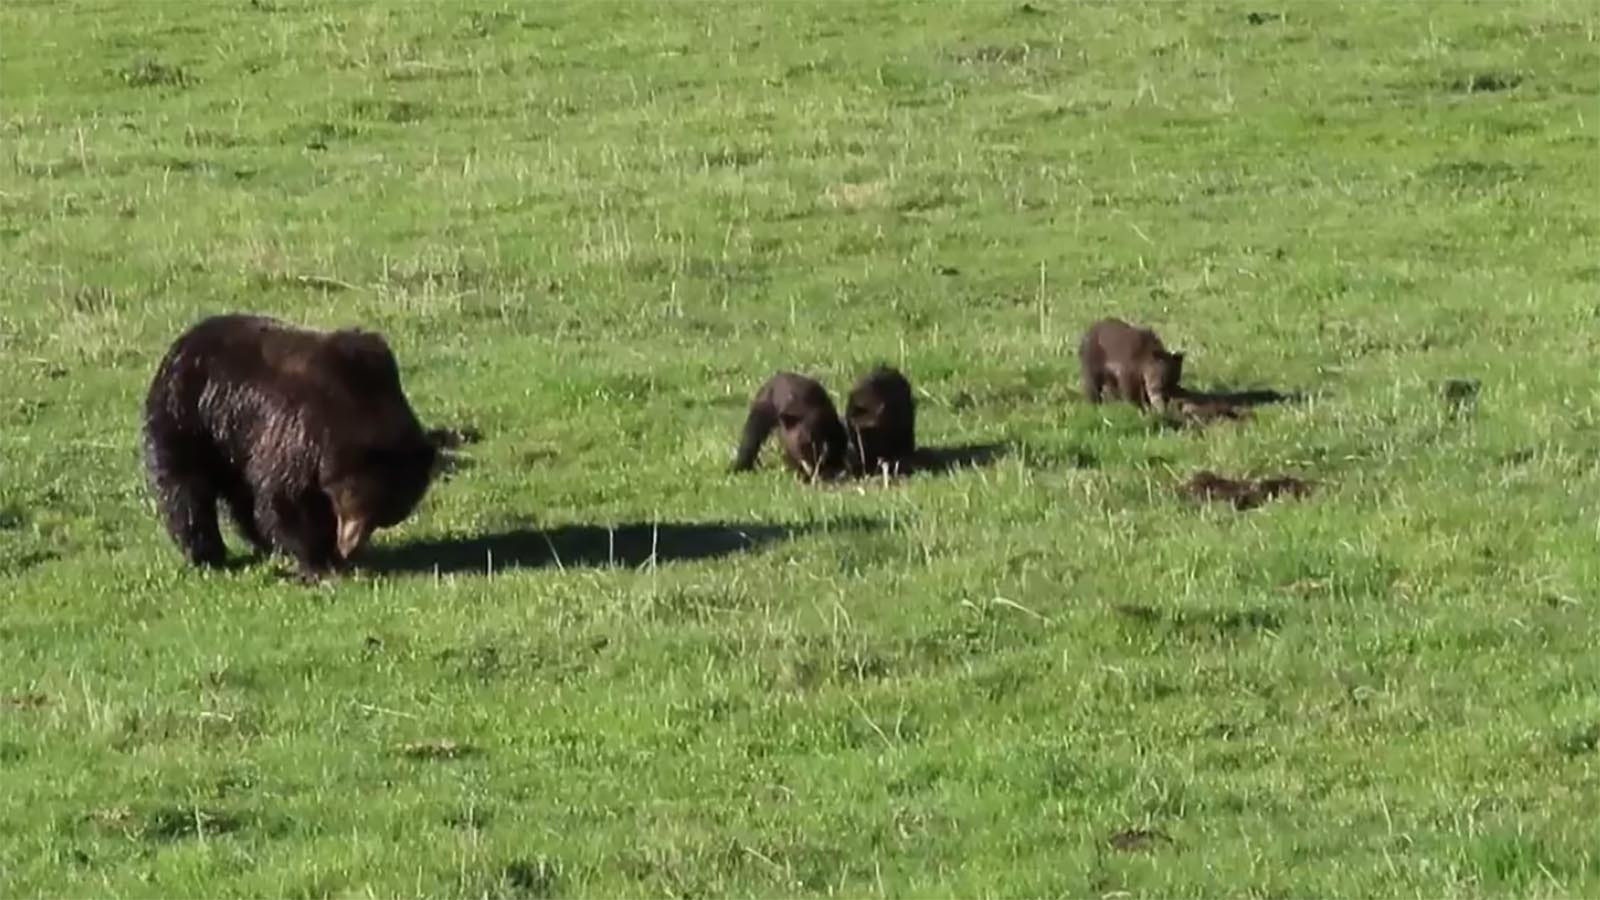 There’s been a boom of grizzly cubs in Yellowstone National Park this year, including this set of triplets.